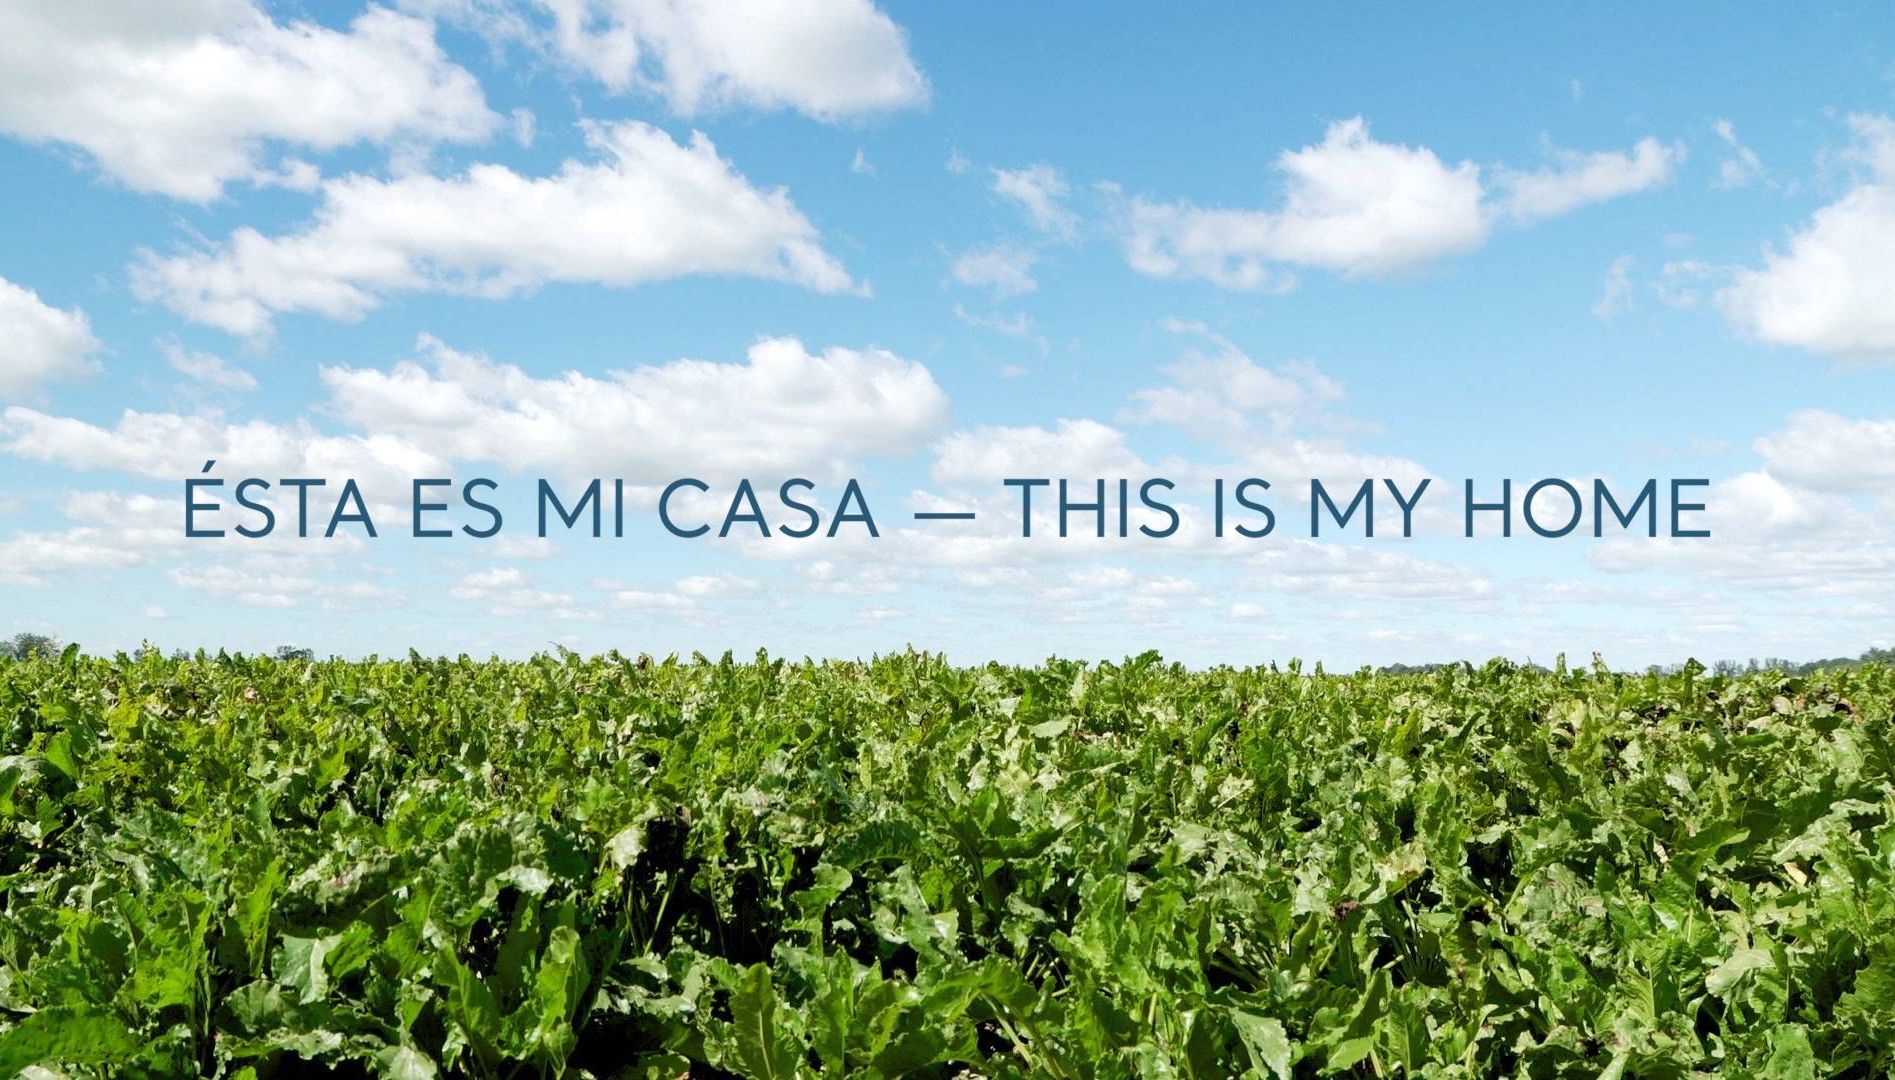 Sugar beet field and blue sky with text superimposed that read Ésta es mi Casa - This is My Home